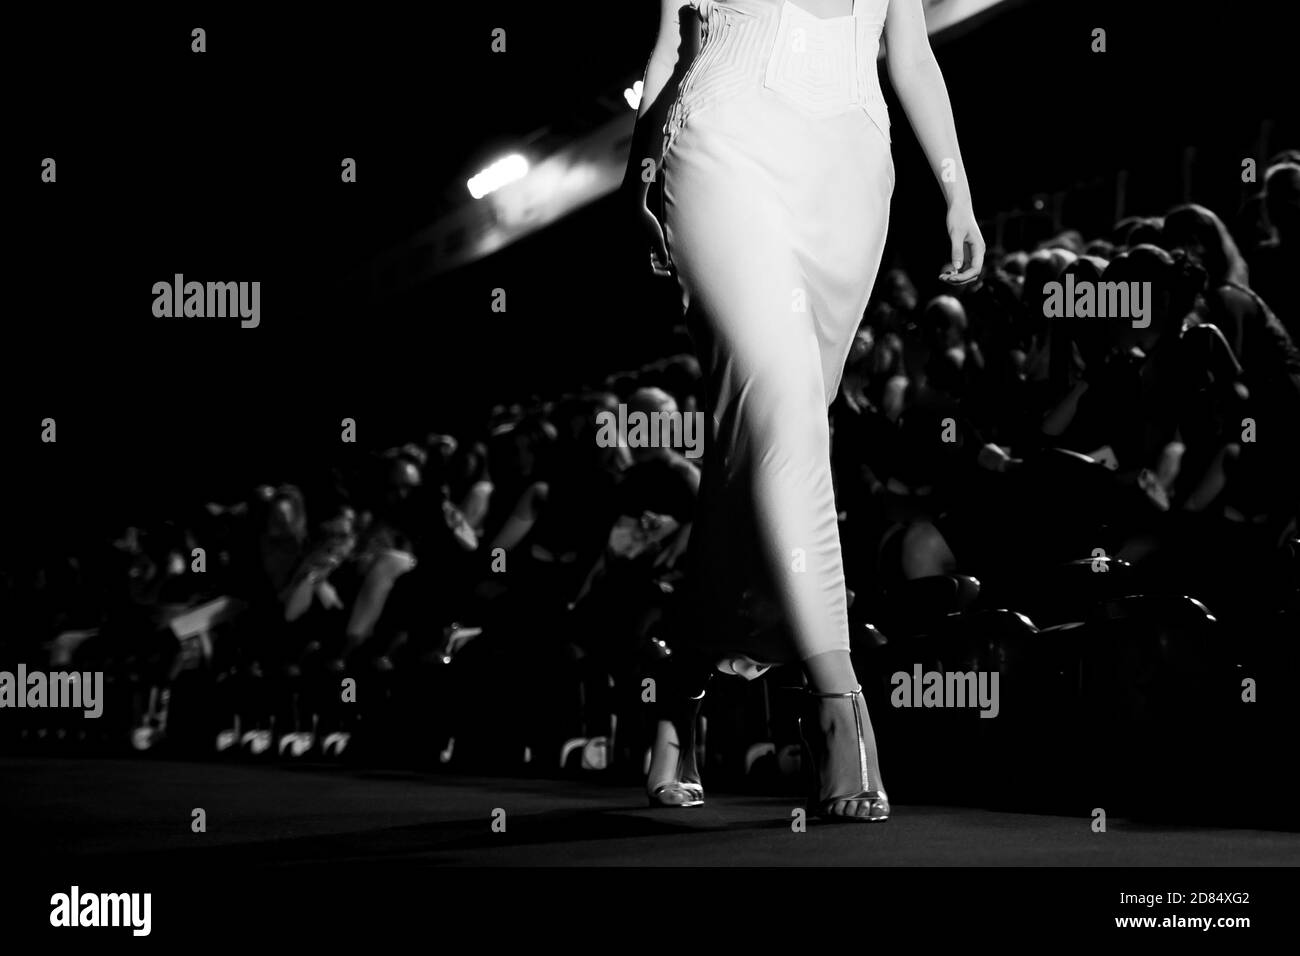 Woman on catwalk Black and White Stock Photos & Images - Alamy